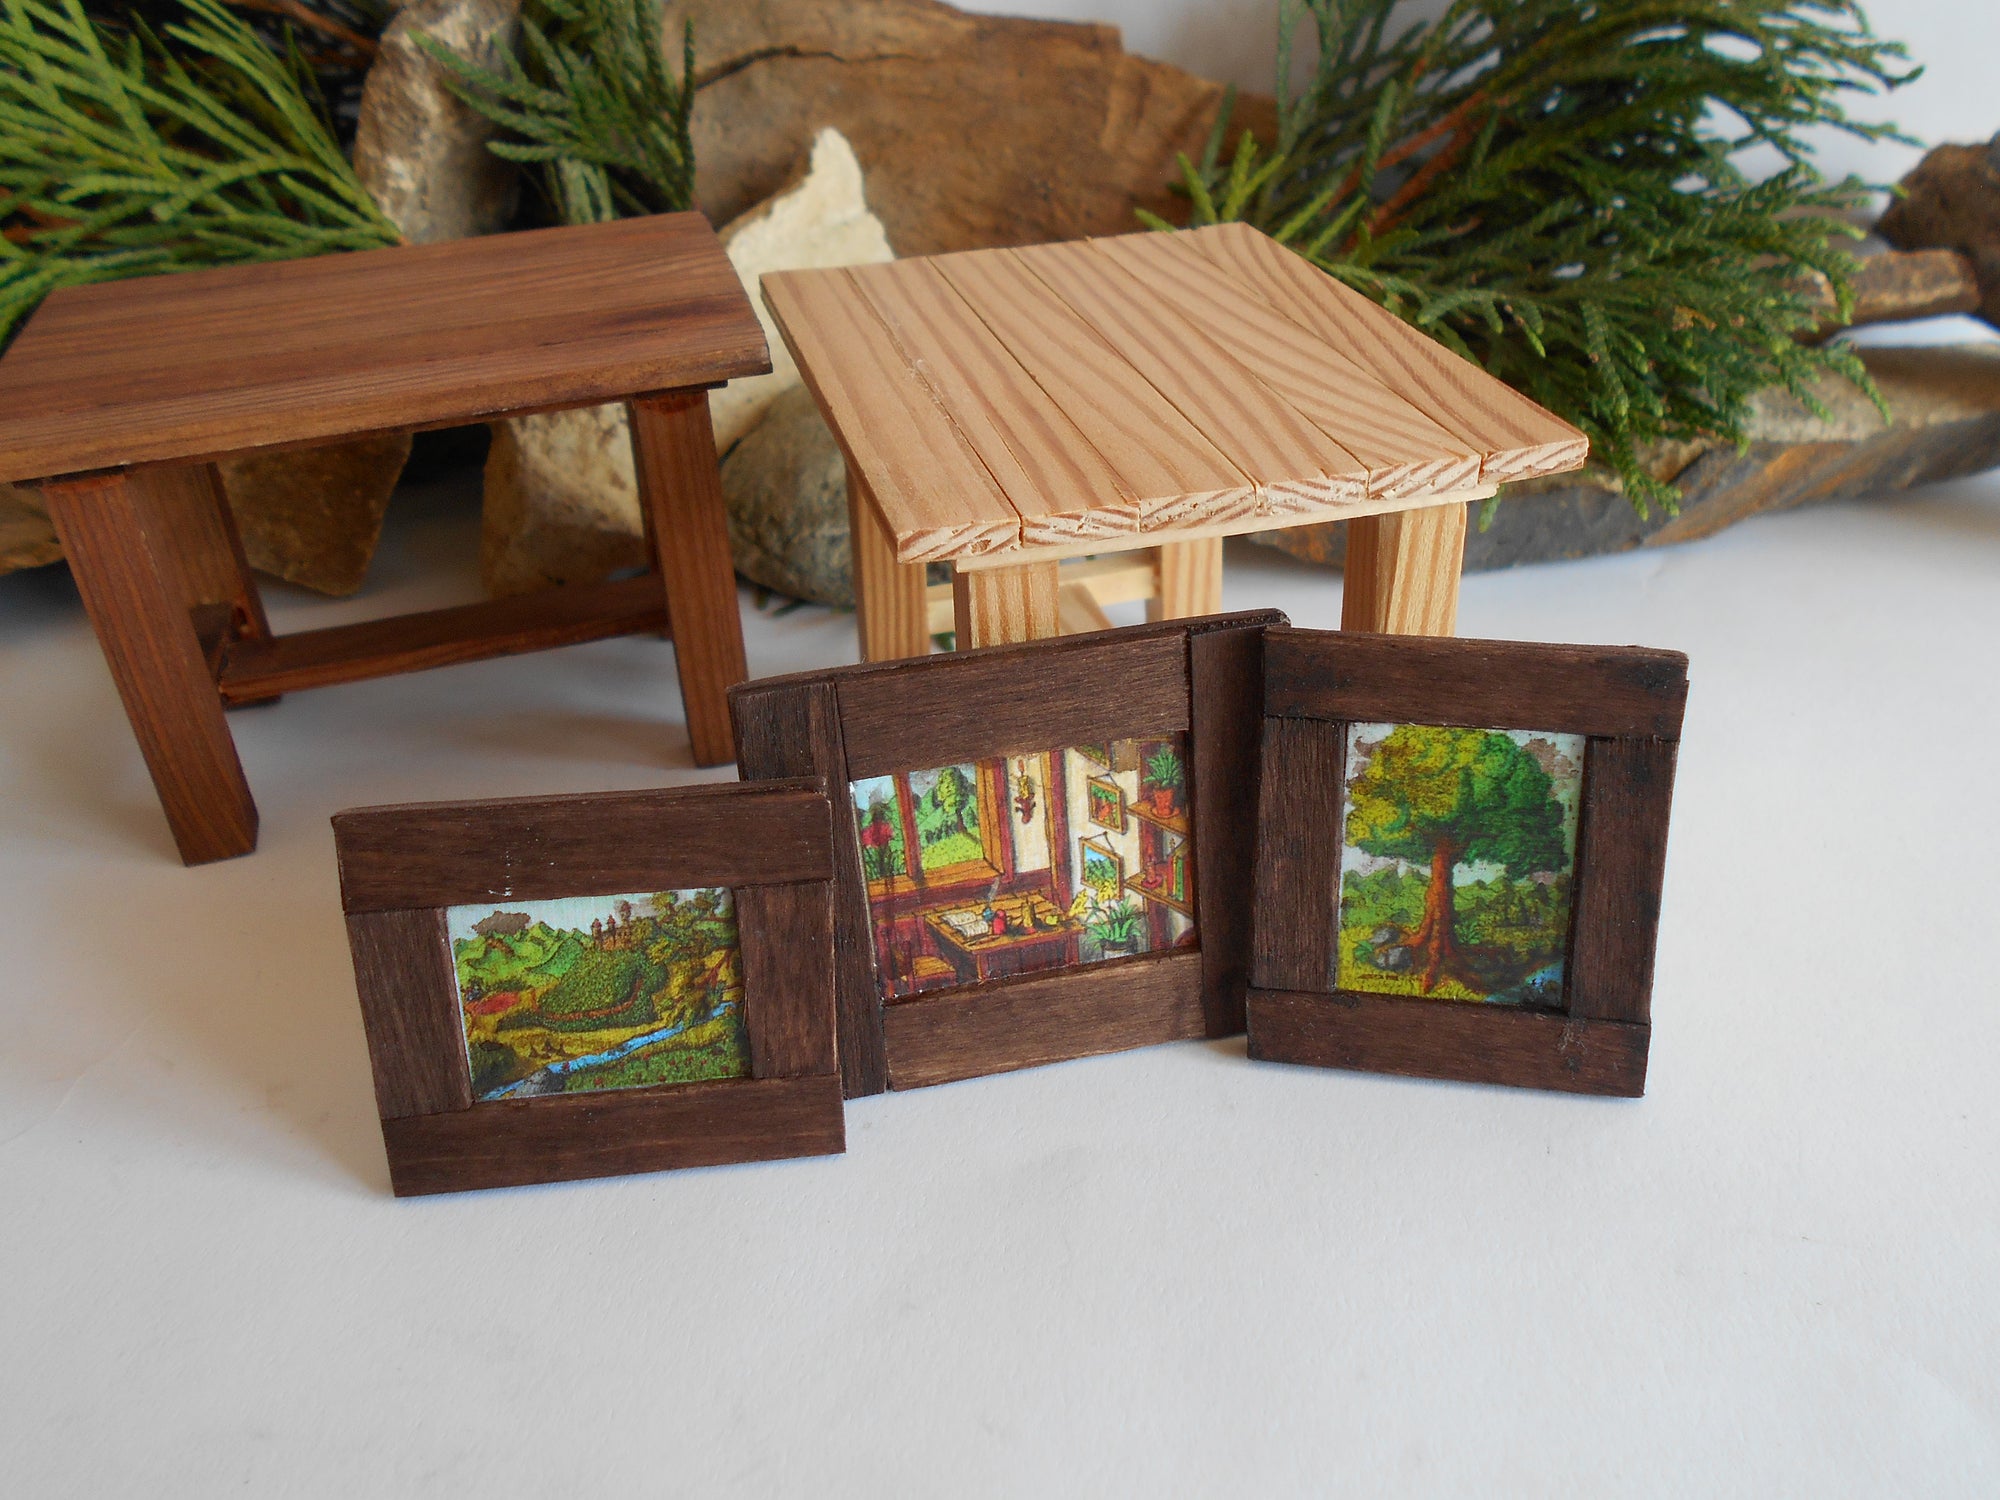 Handmade miniature wooden tables and wooden framed paintings mini decorations for dollhouses by Exirts eco-friendly company and Hristo Hvoynev